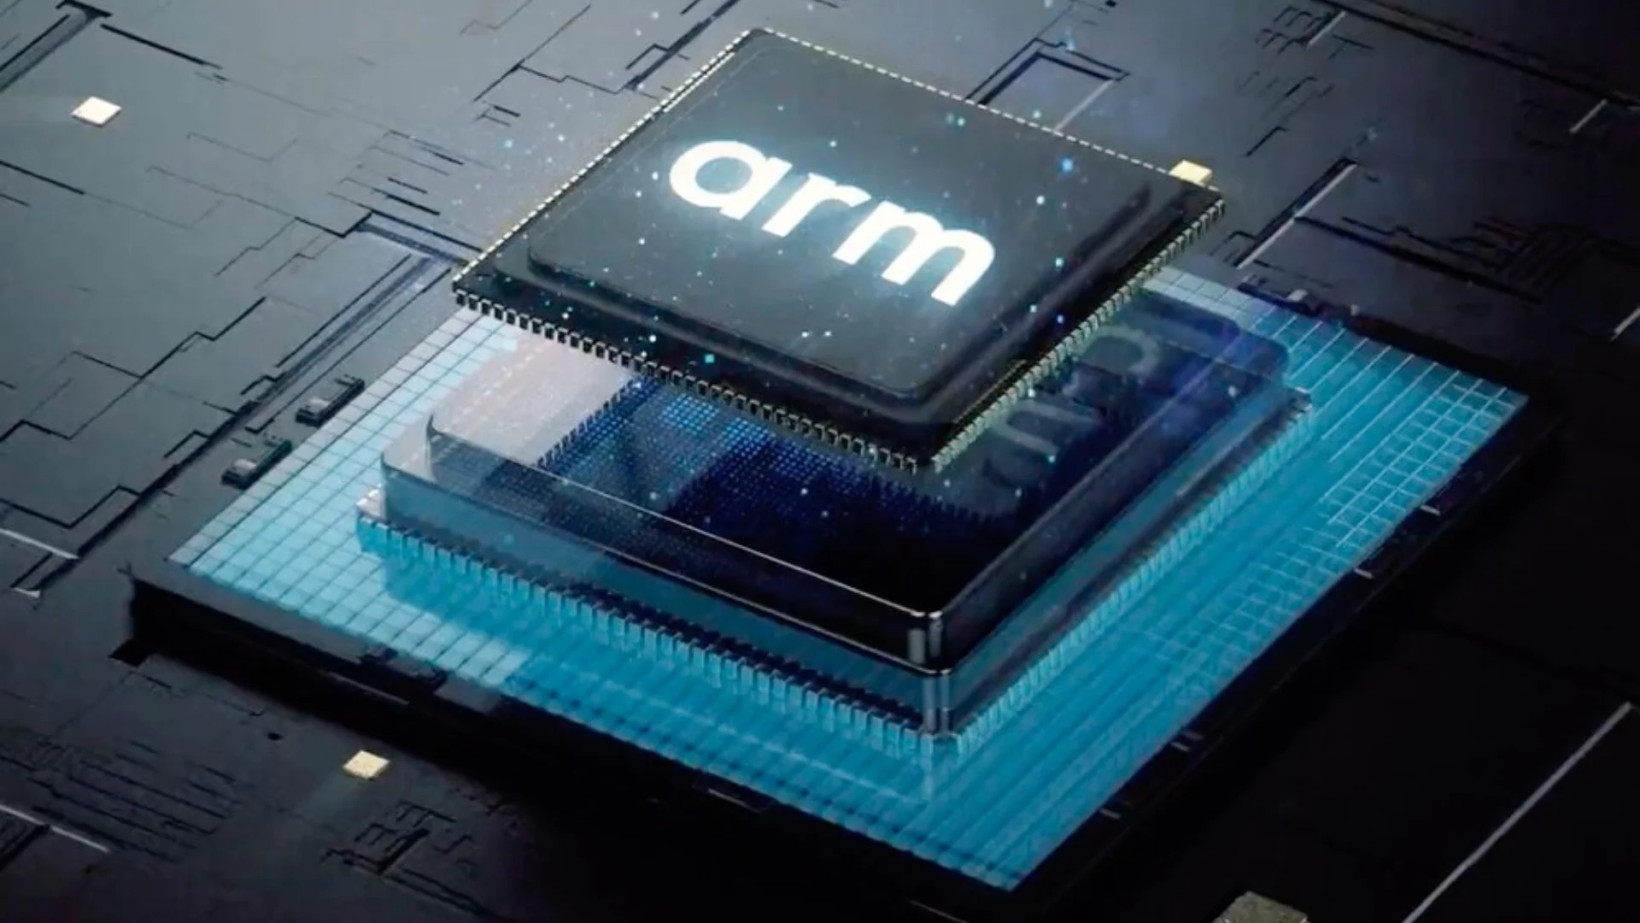 Arm IPO Filing: Chip Maker Files To Go Public In The U.S.